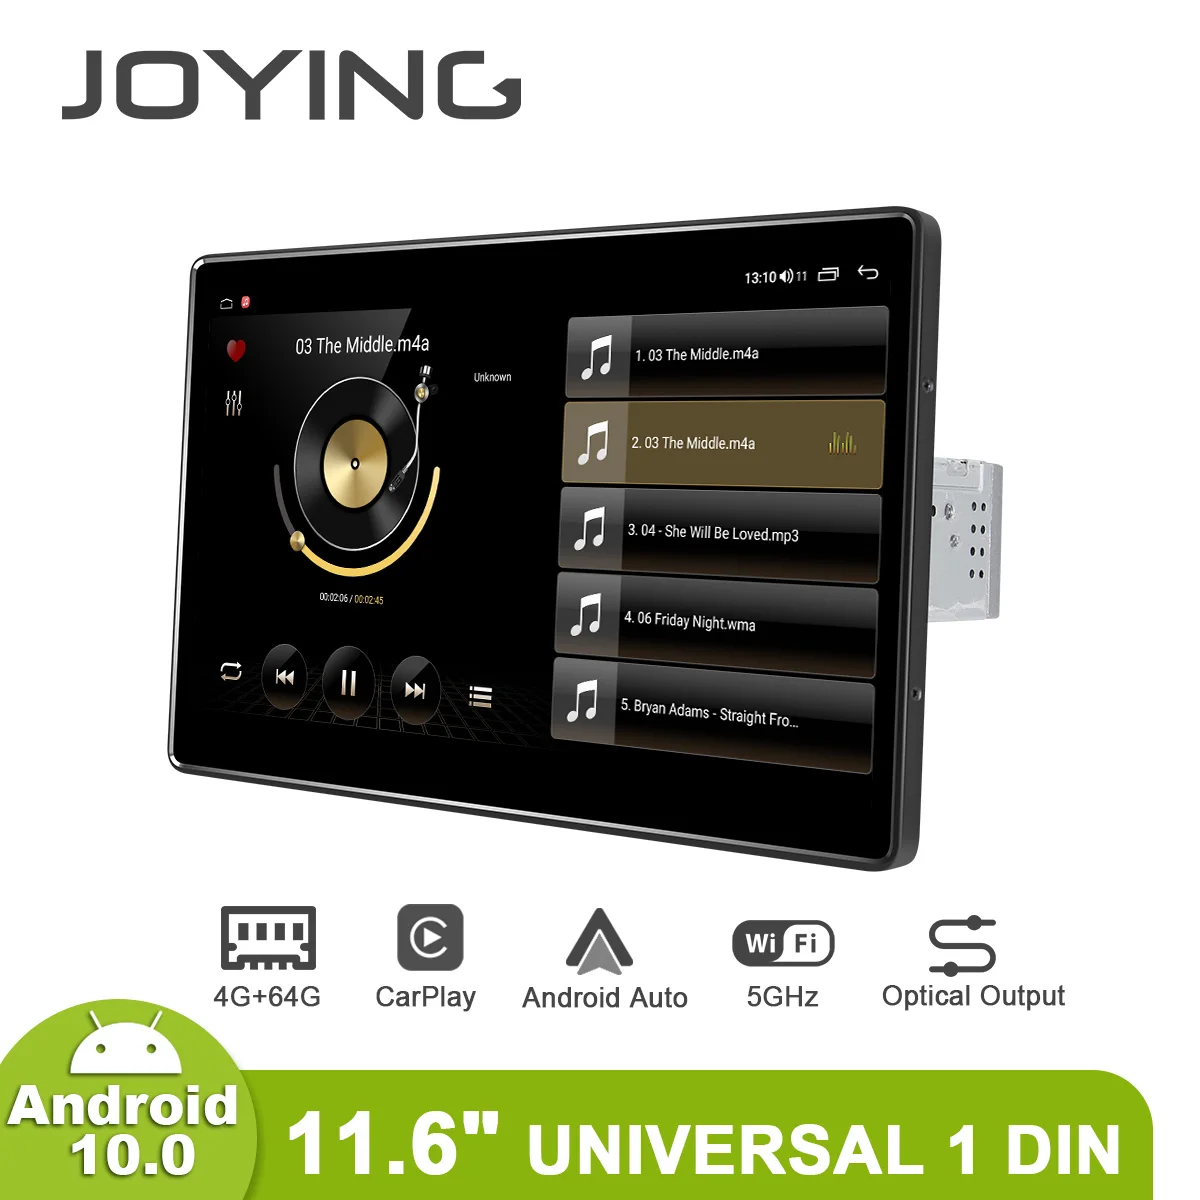 JOYING Double Din Android 10 Car Stereo with 11.6 Inch 1920 x 1080